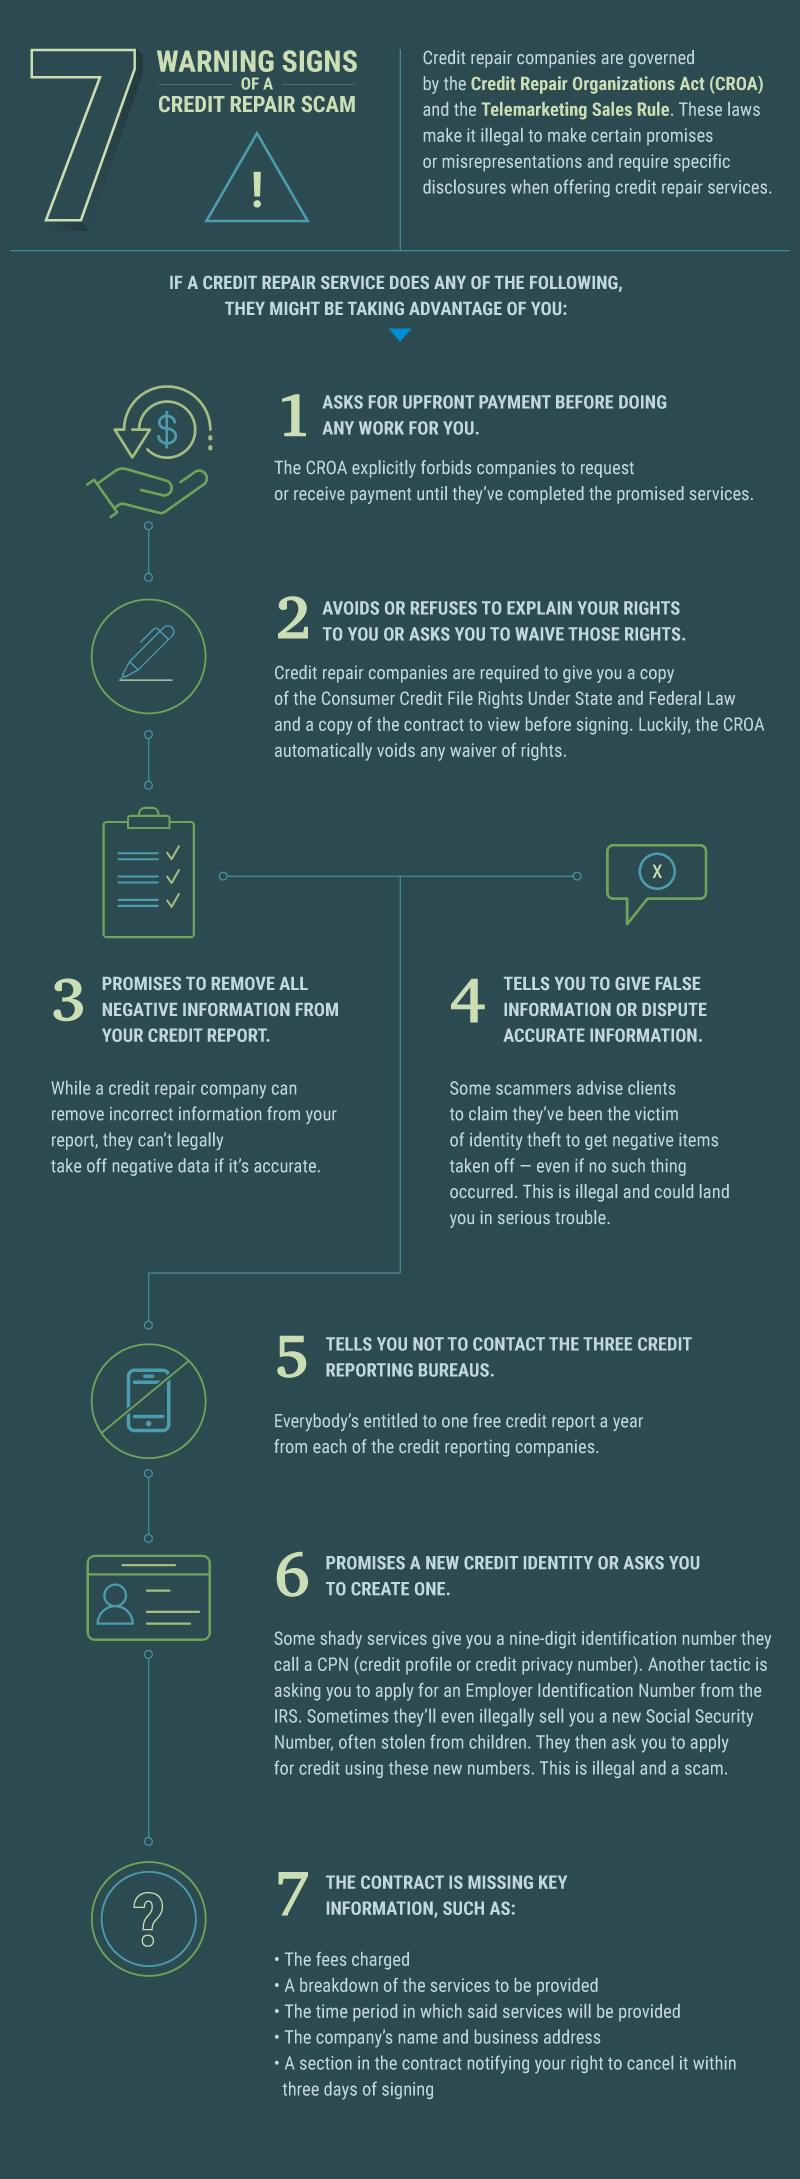 7 warning signs of a credit repair scam